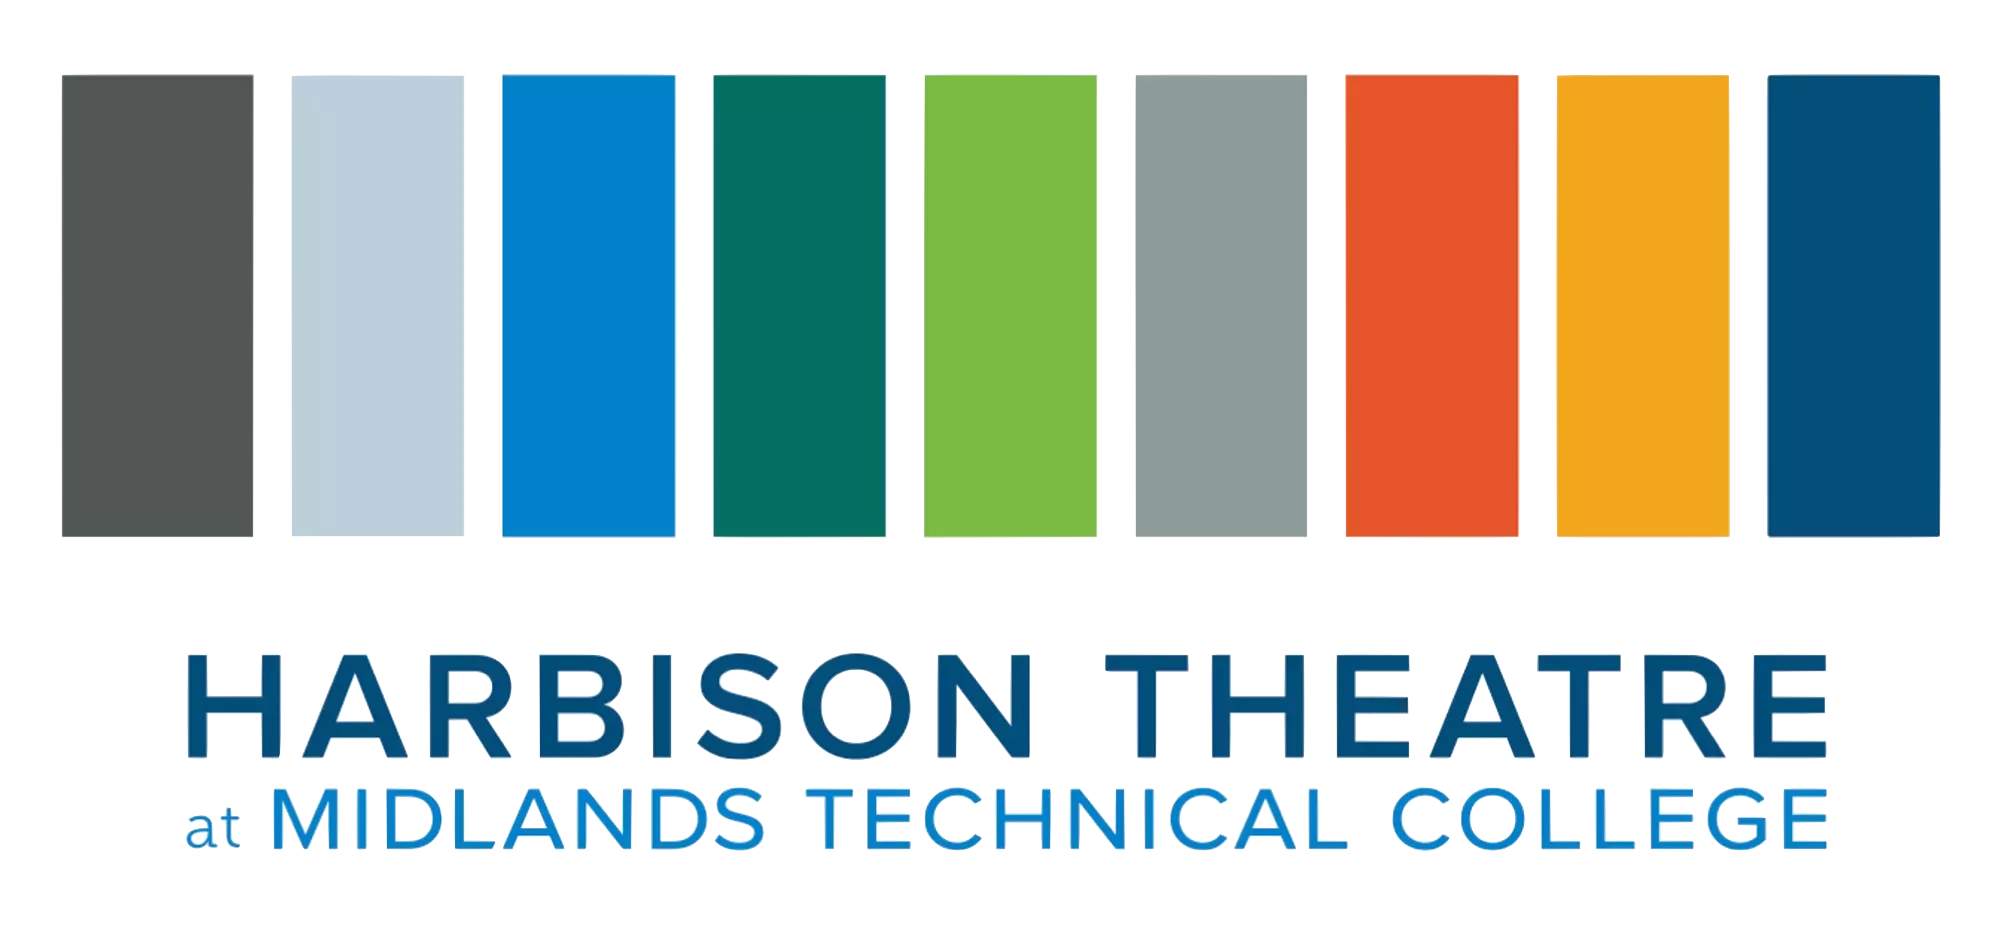 Harbison Theatre logo and text that says Harbison Theatre at Midlands Technical College